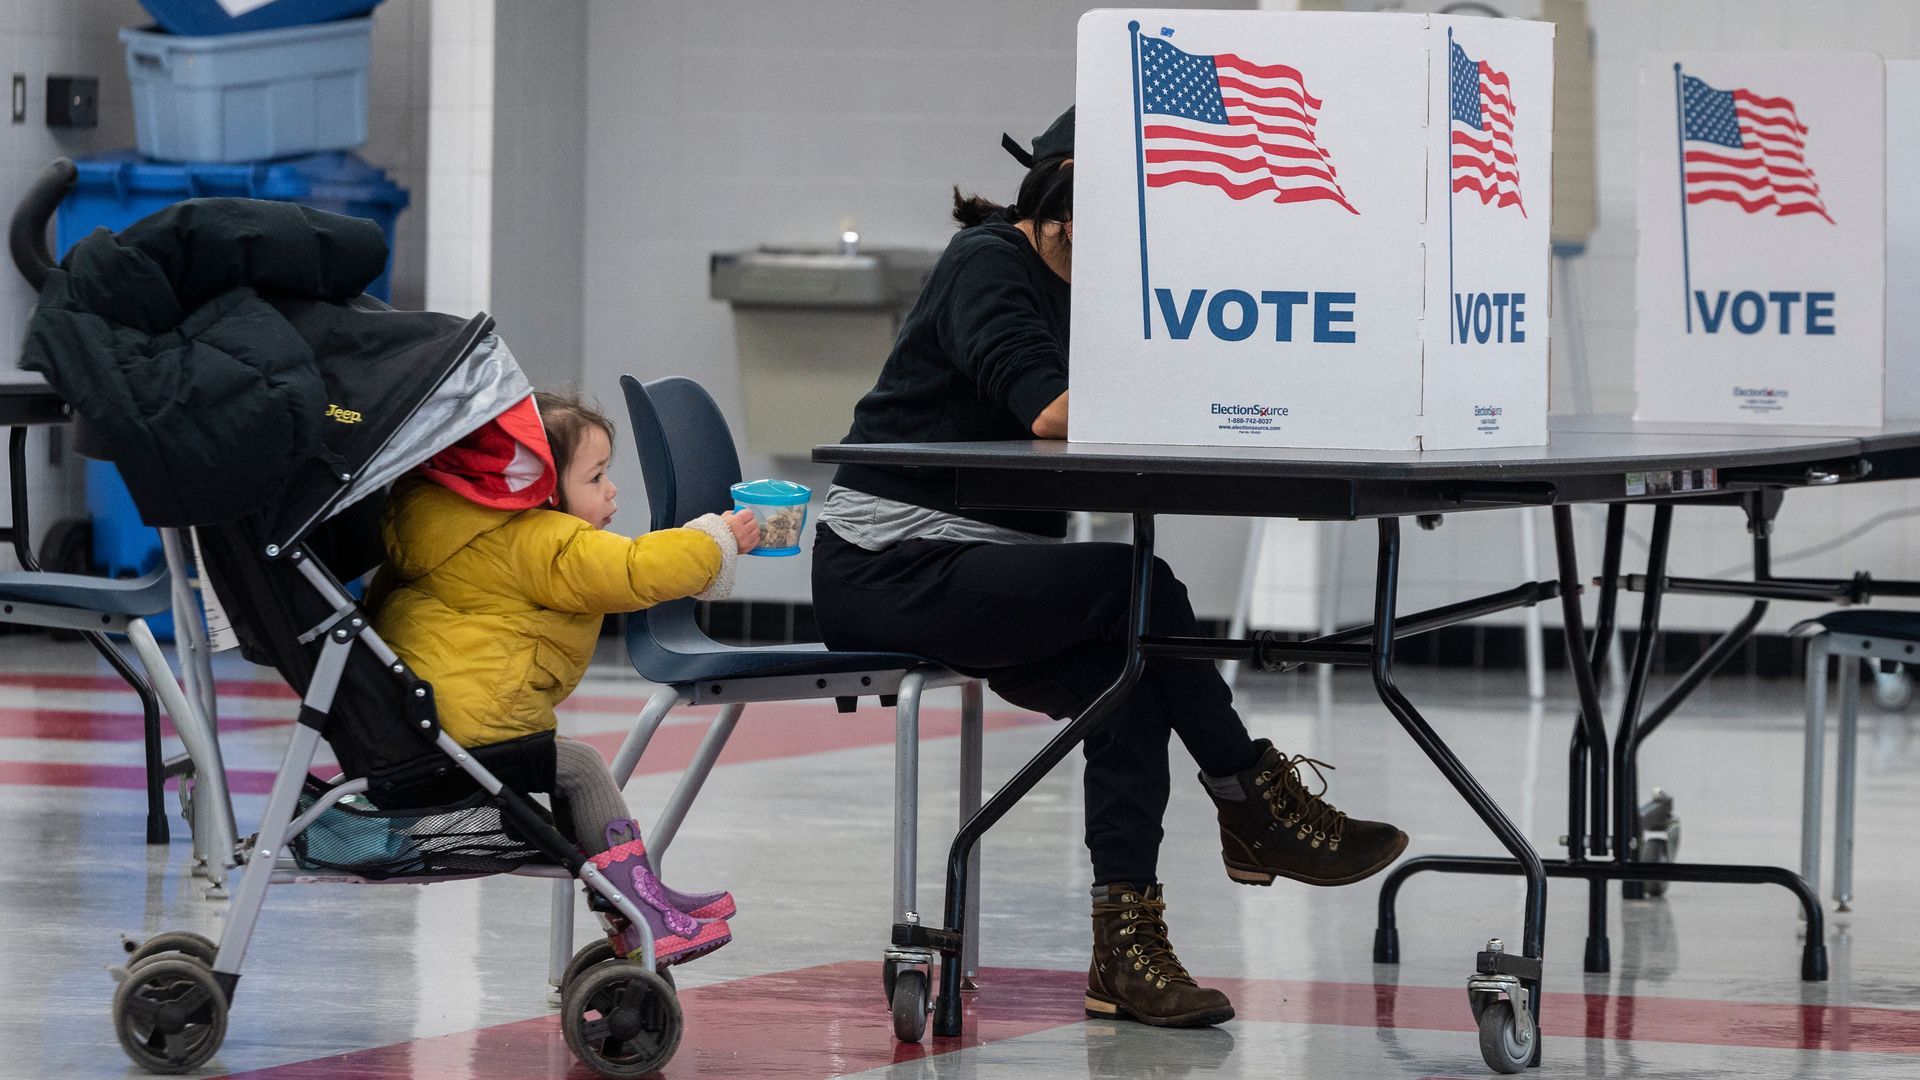 A toddler is seen placing their snack on a table as an adult casts a ballot in the Virginia election.